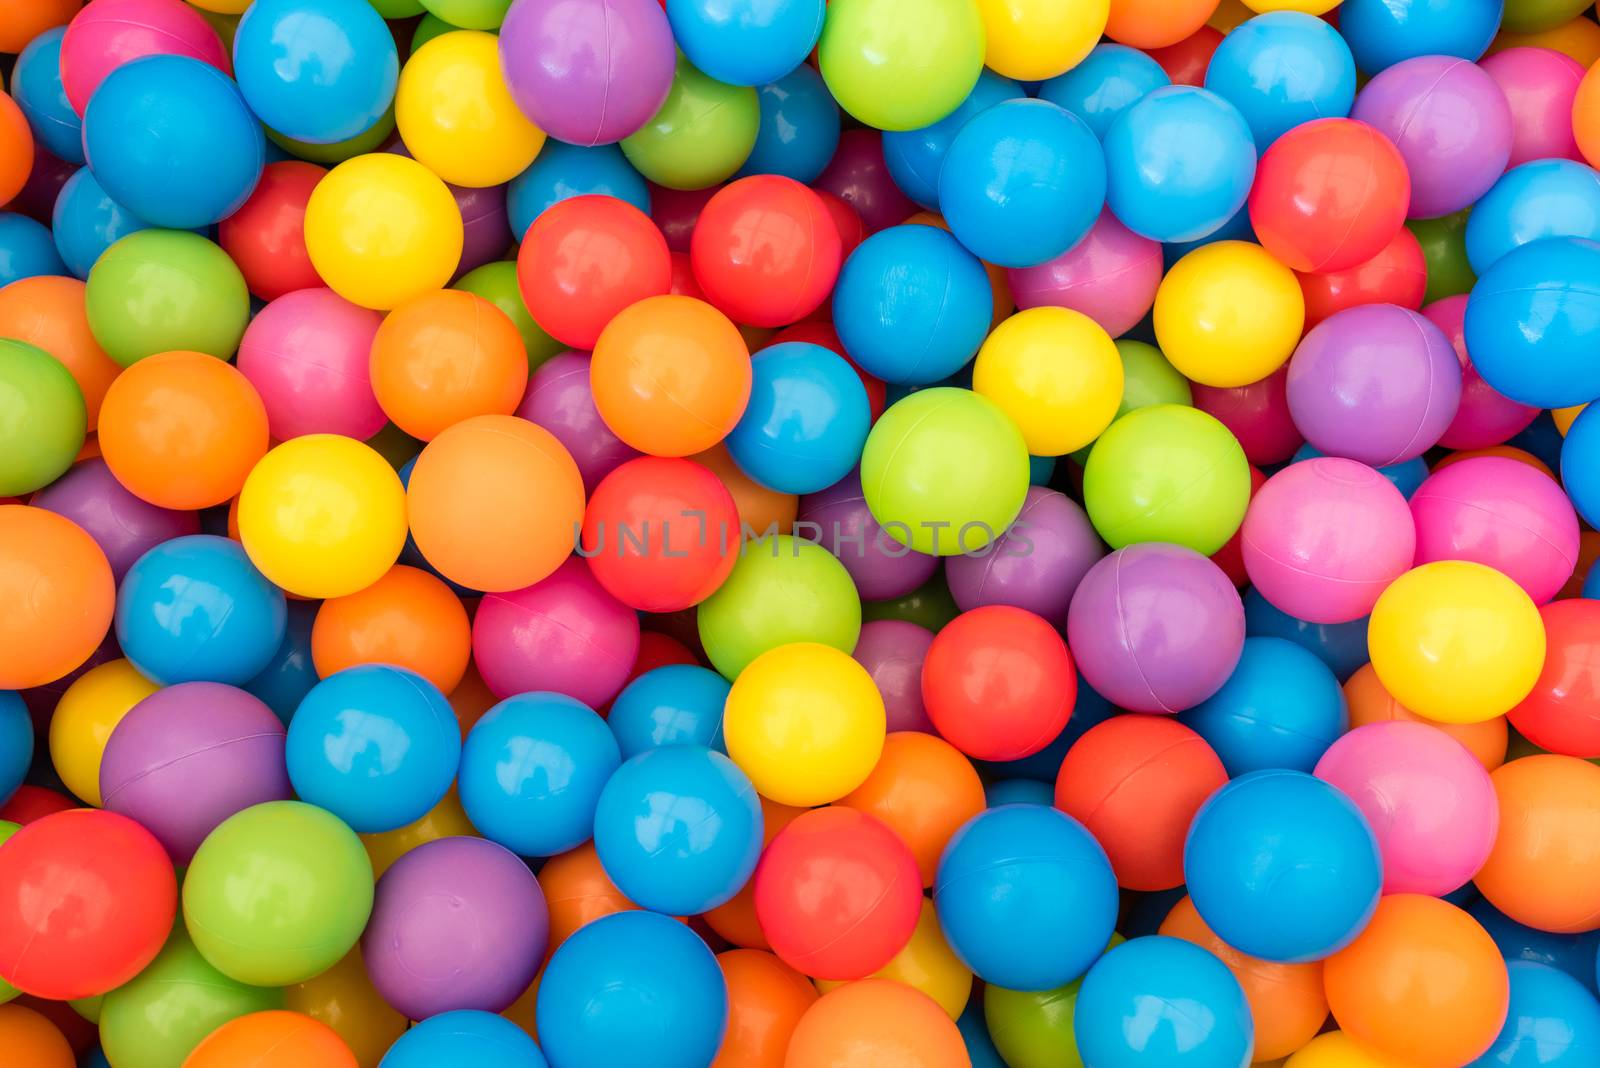 Many colorful plastic balls in a kids' ballpit at a playground.